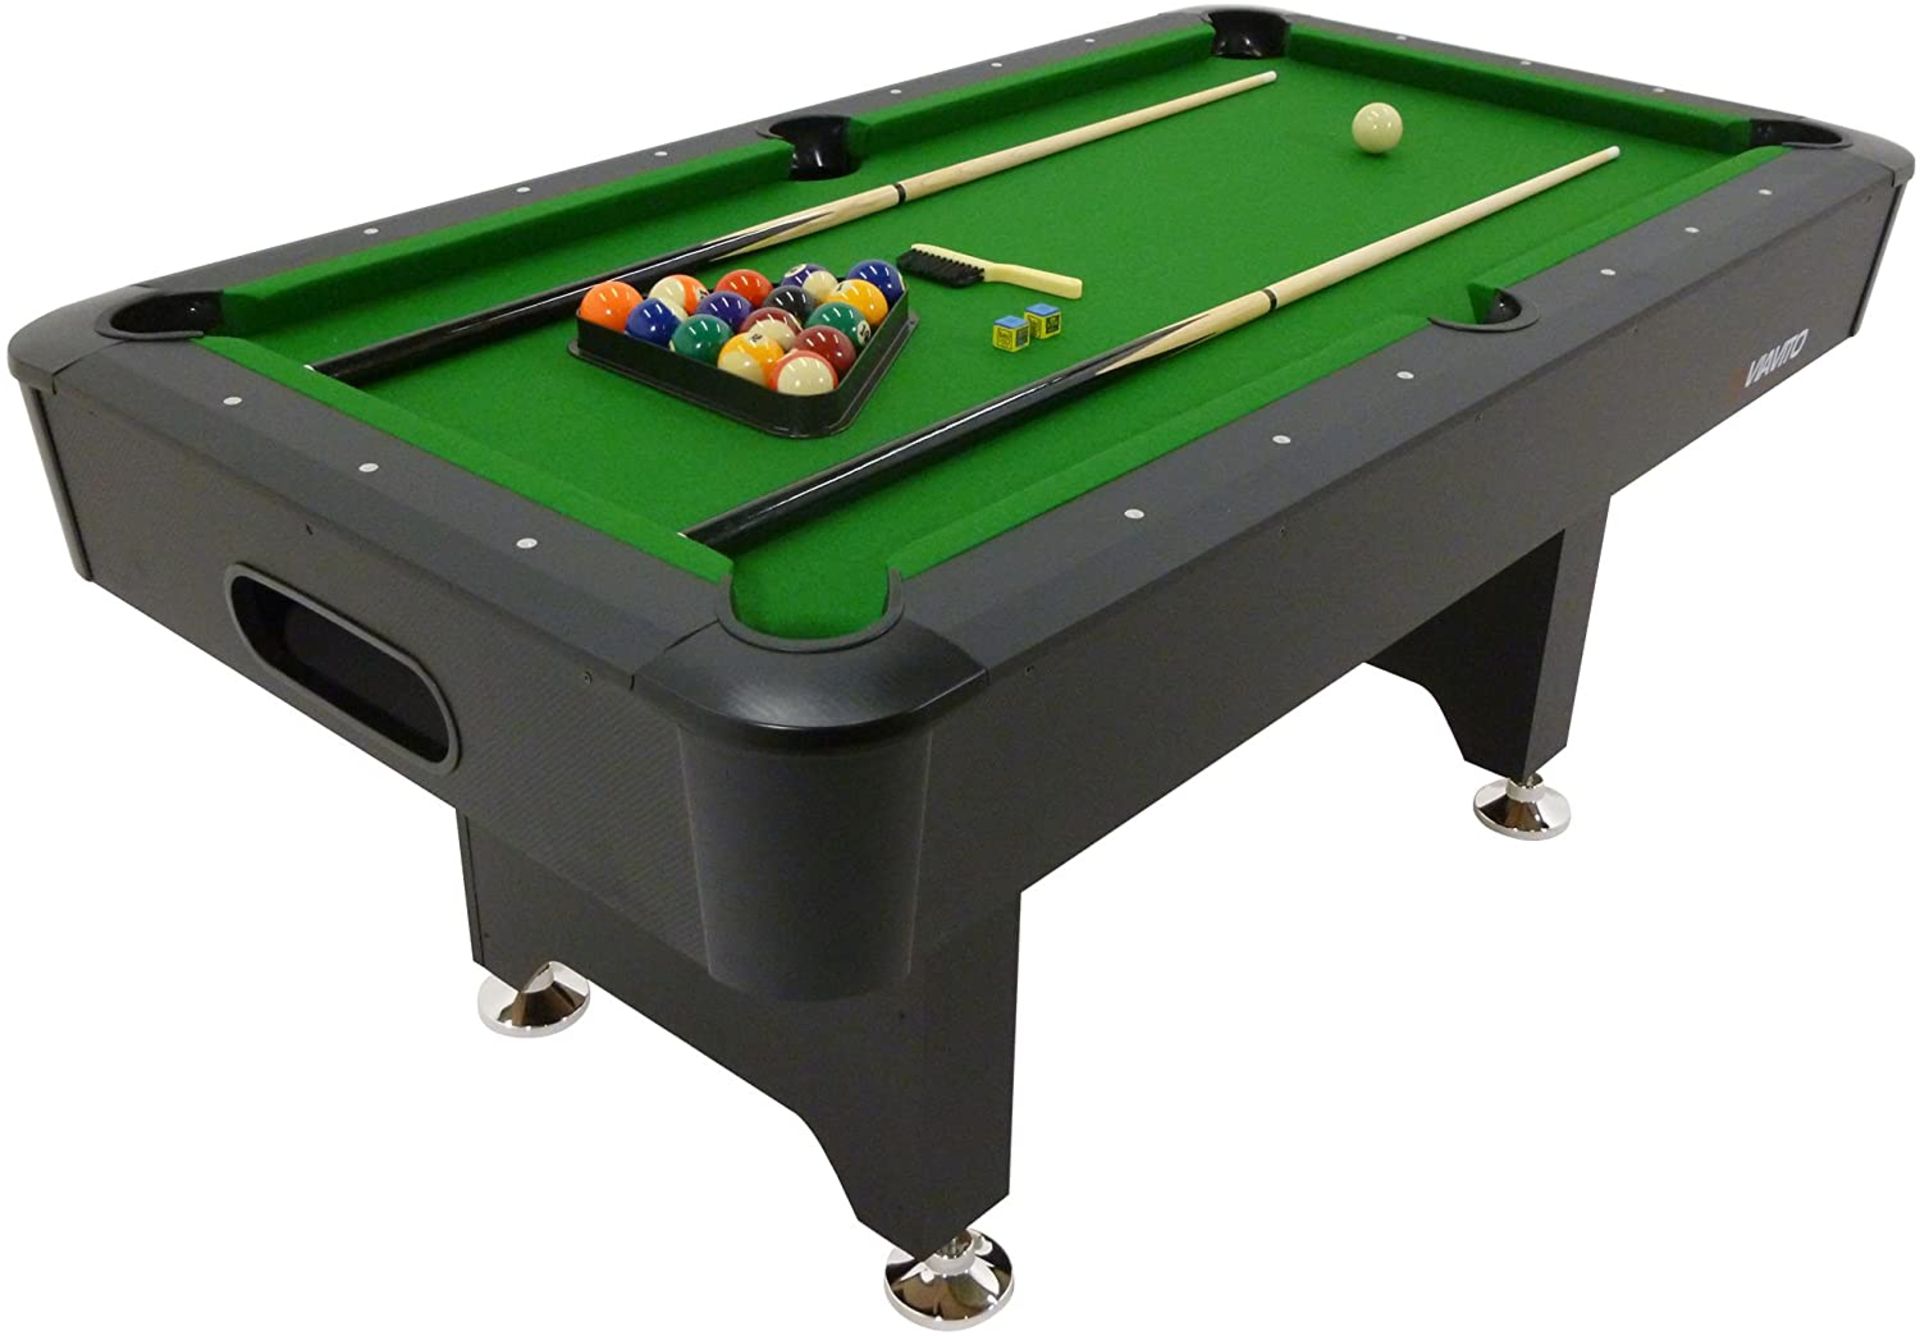 1 x Sweatband Viavito PT200 6ft Pool Table BLACK WITH GREEN CLOTH SURFACE RRP £479.00 This lot is